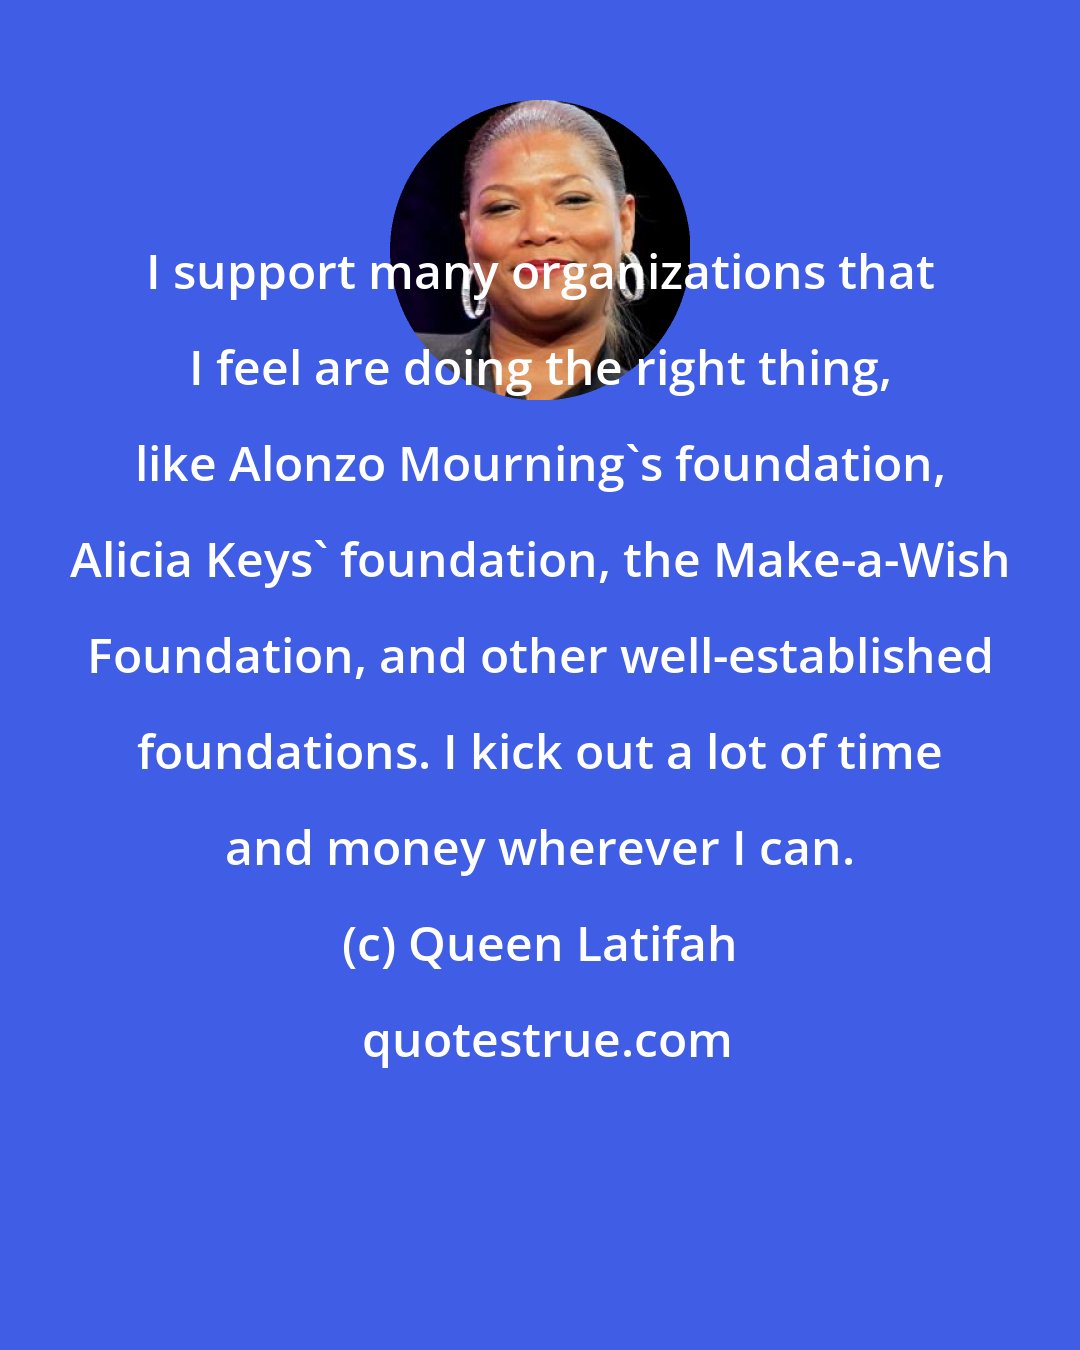 Queen Latifah: I support many organizations that I feel are doing the right thing, like Alonzo Mourning's foundation, Alicia Keys' foundation, the Make-a-Wish Foundation, and other well-established foundations. I kick out a lot of time and money wherever I can.